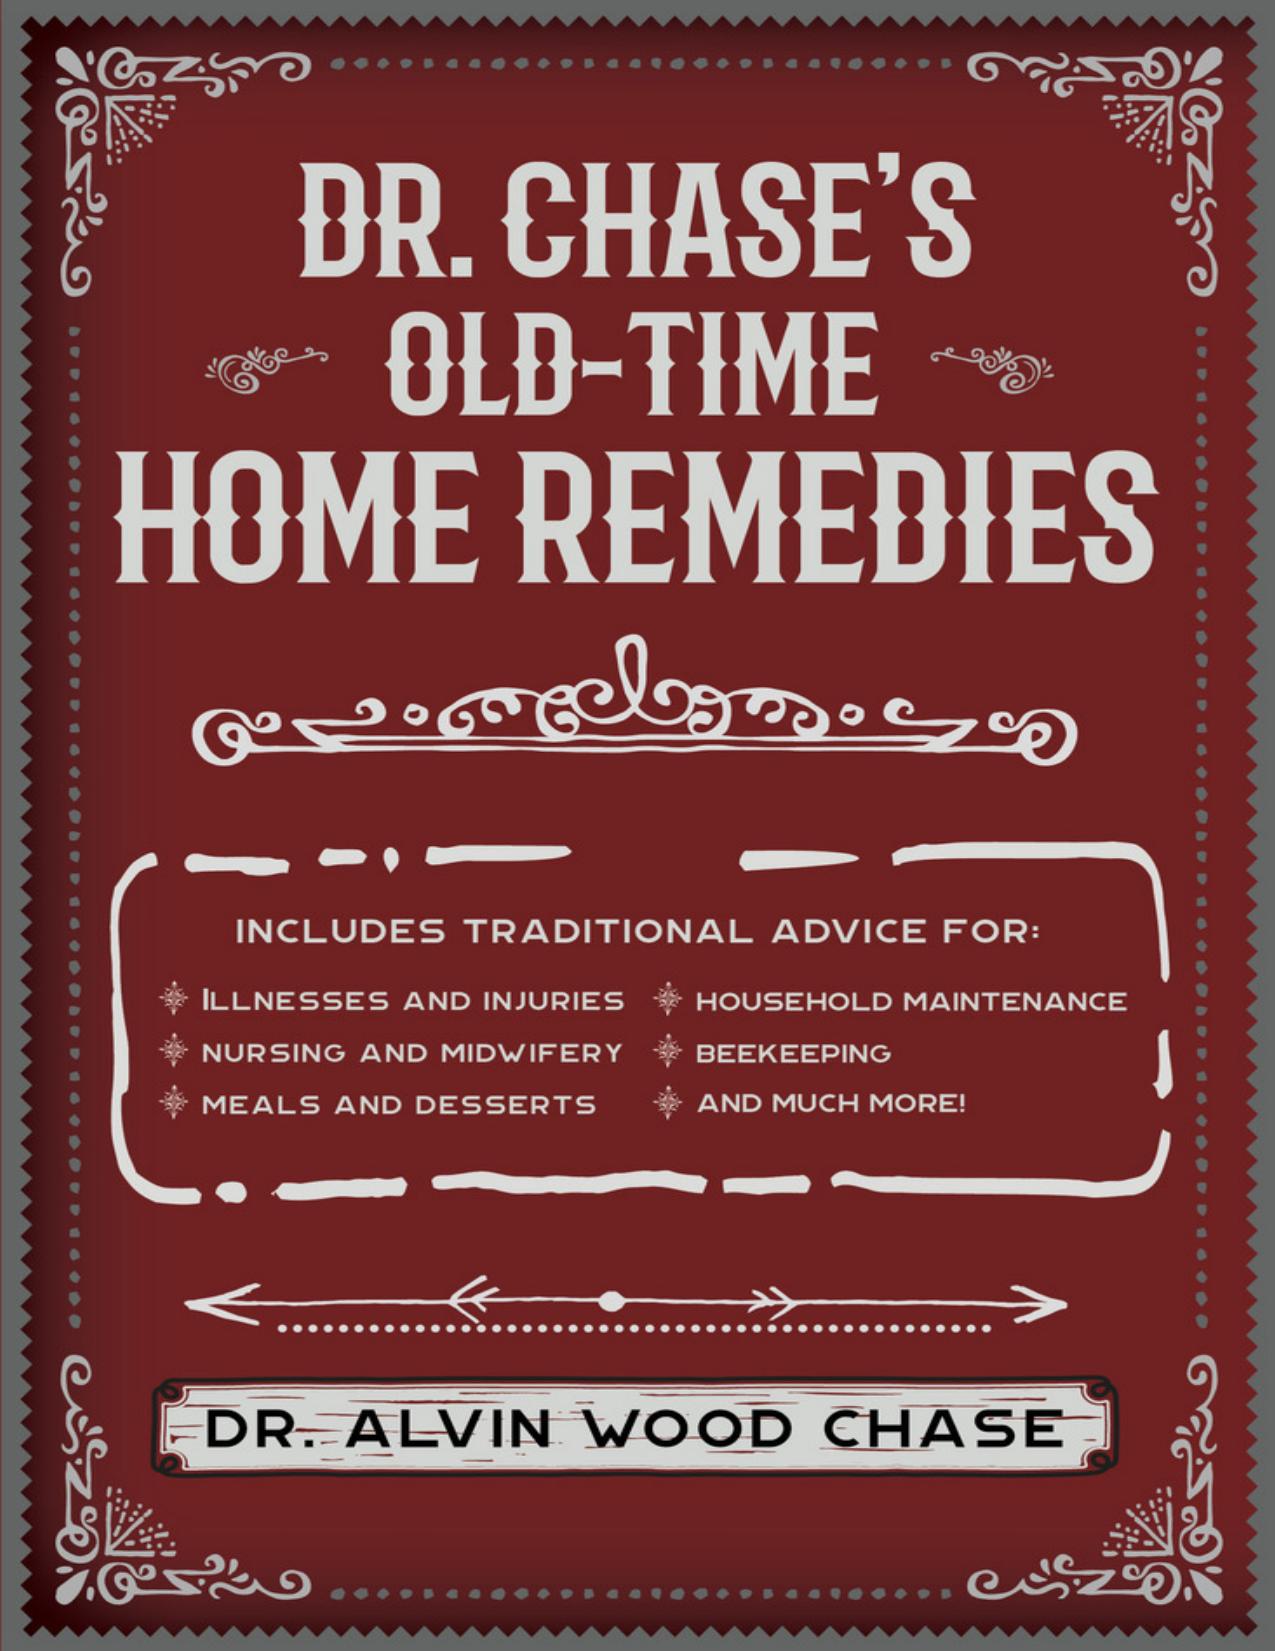 Dr. Chase's Old-Time Home Remedies by Alvin Wood Chase